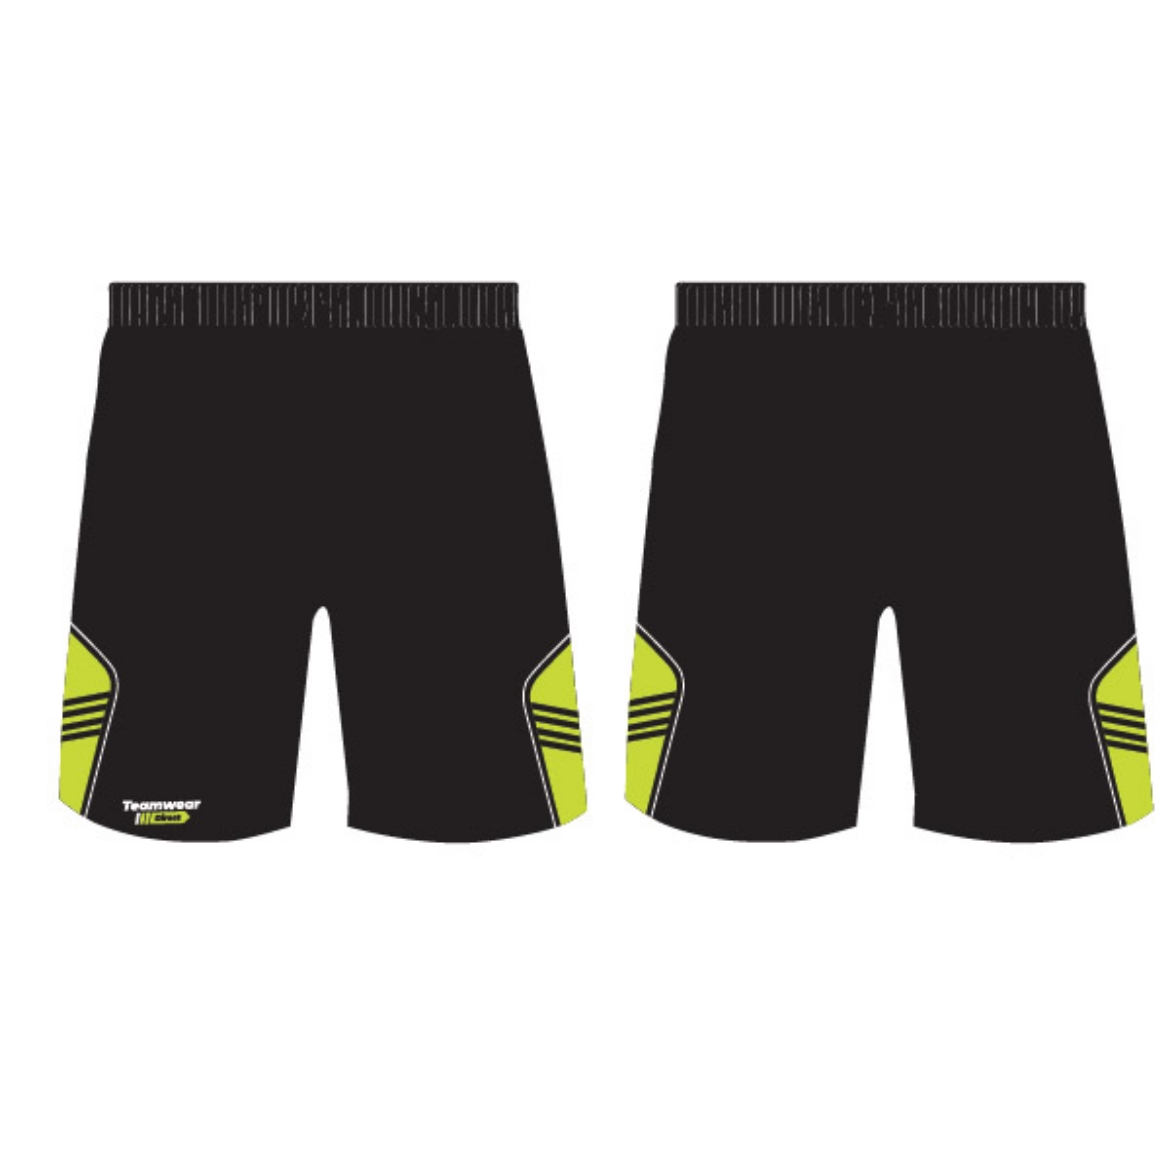 Picture of Teamwear Direct Champion Shorts